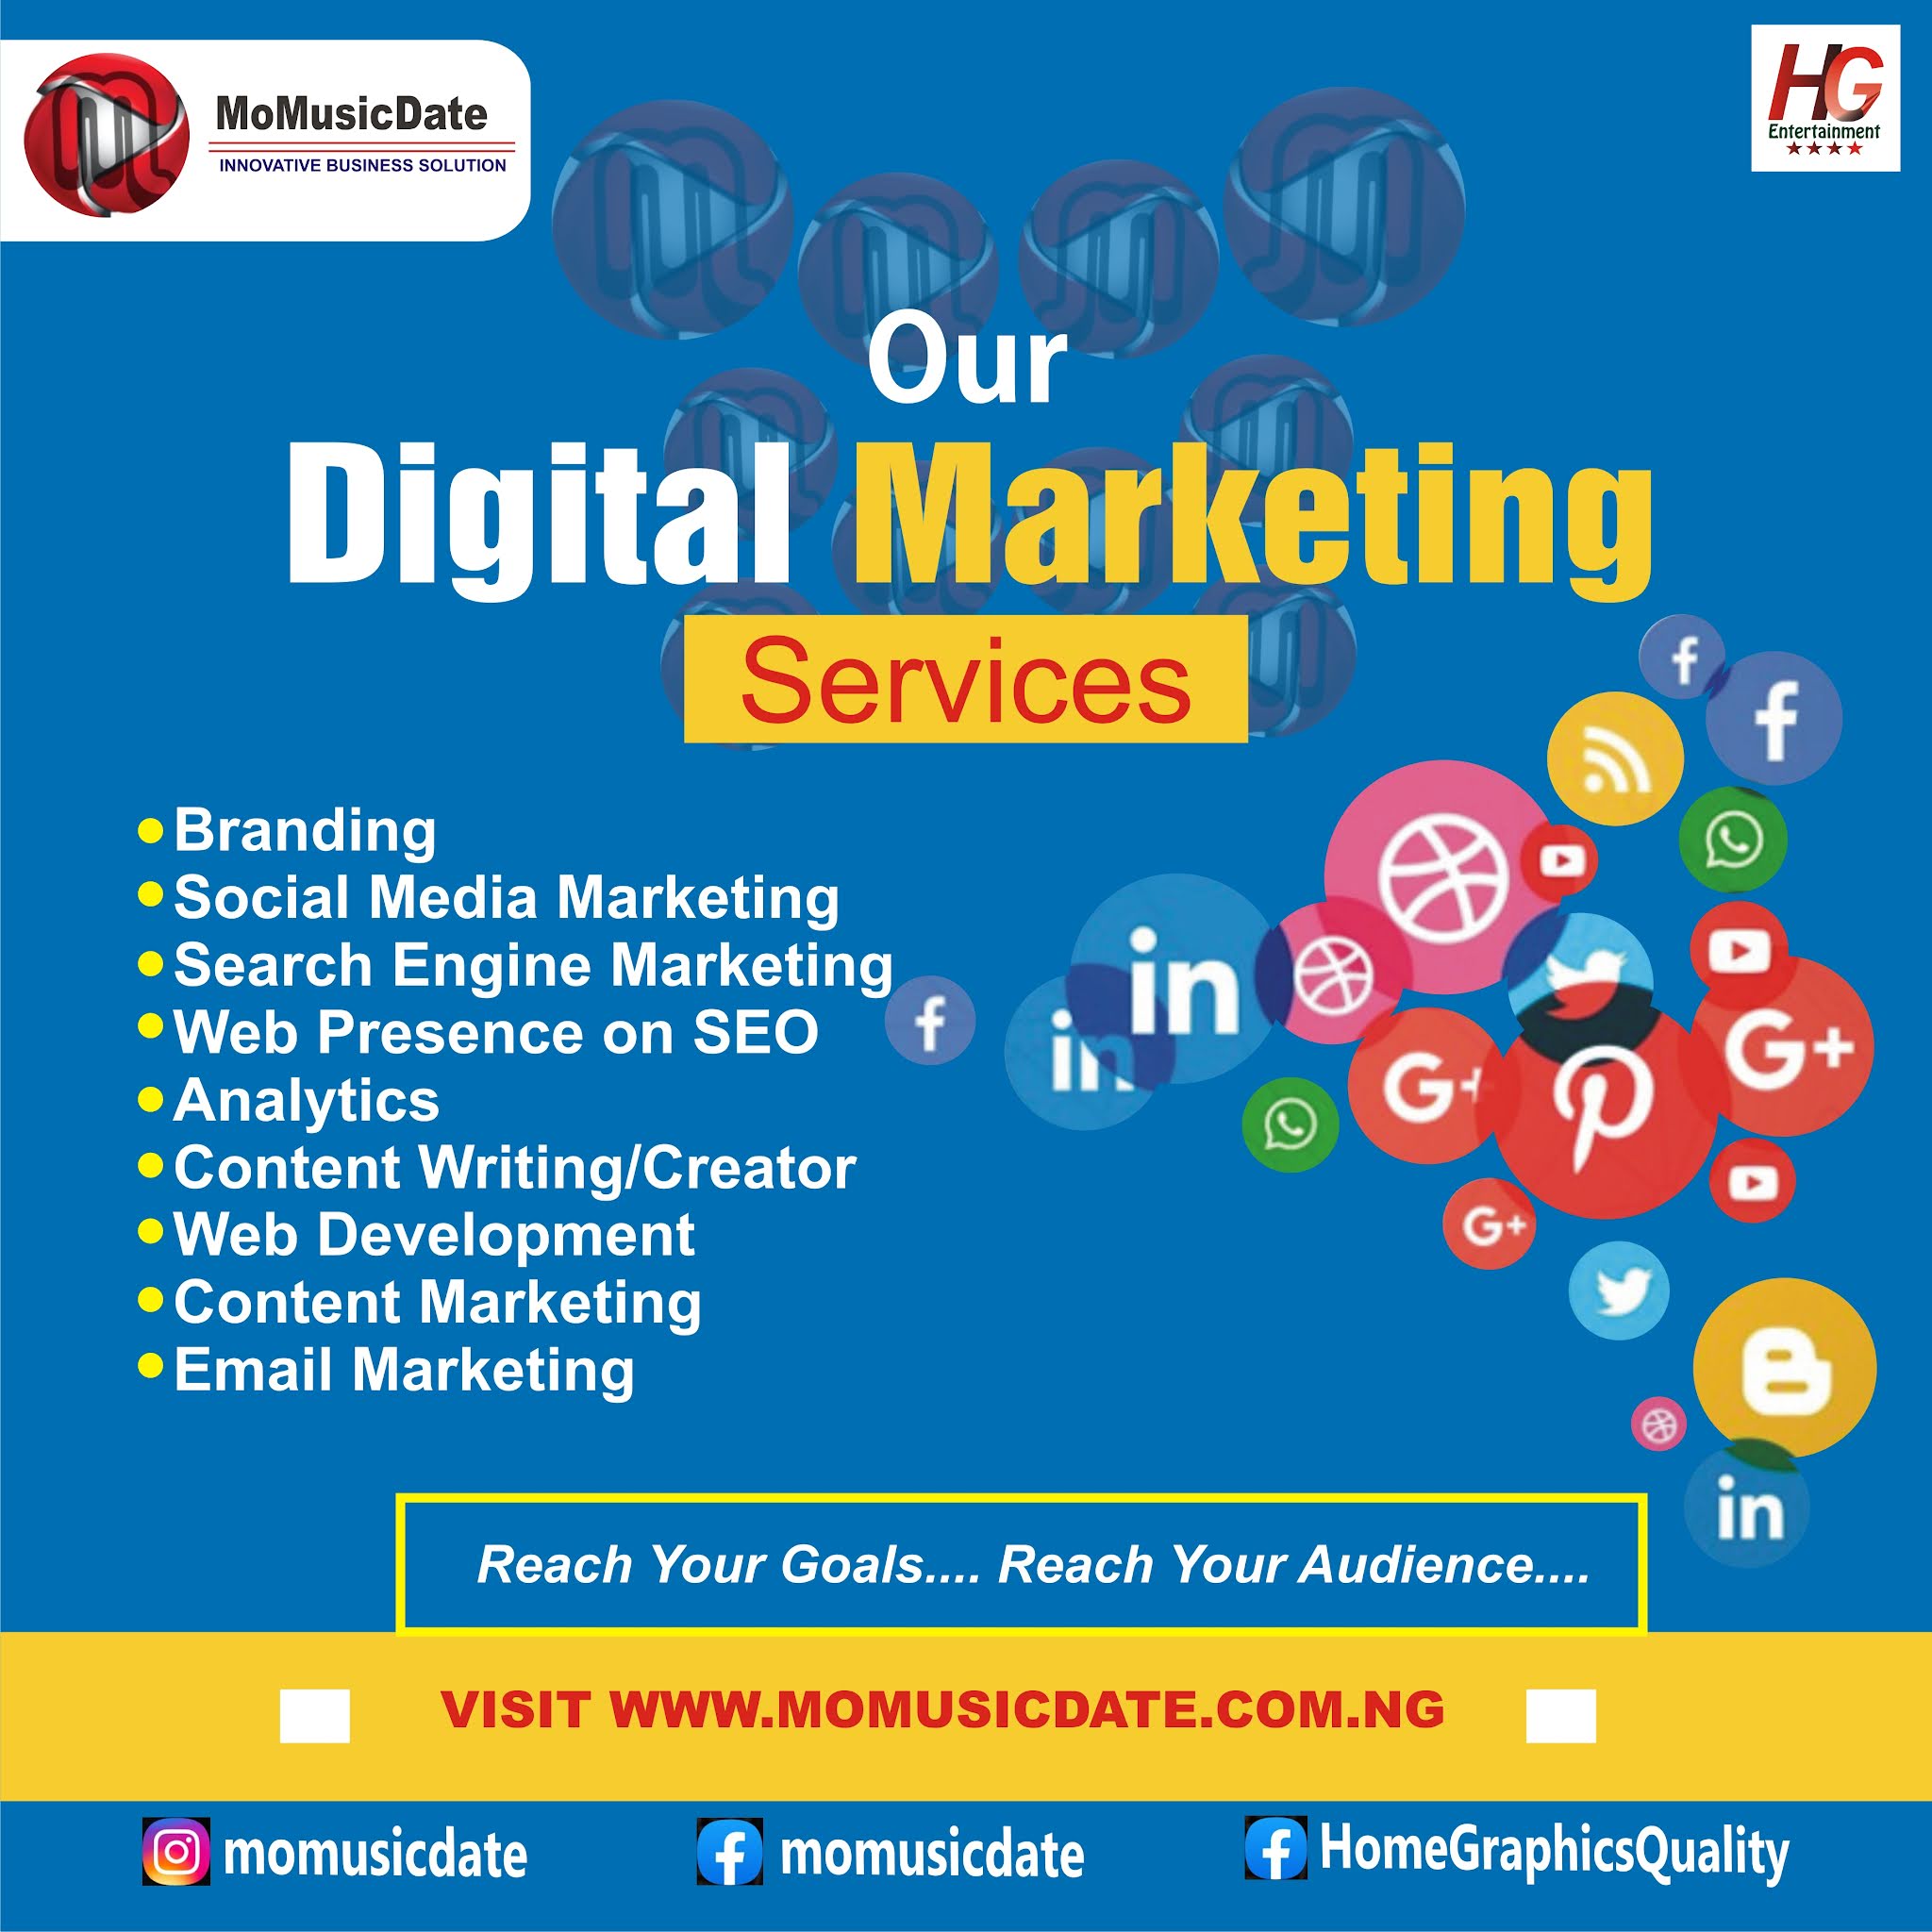 Digital Marketing Agency, Branding, Improve Your Visibility,Leads,